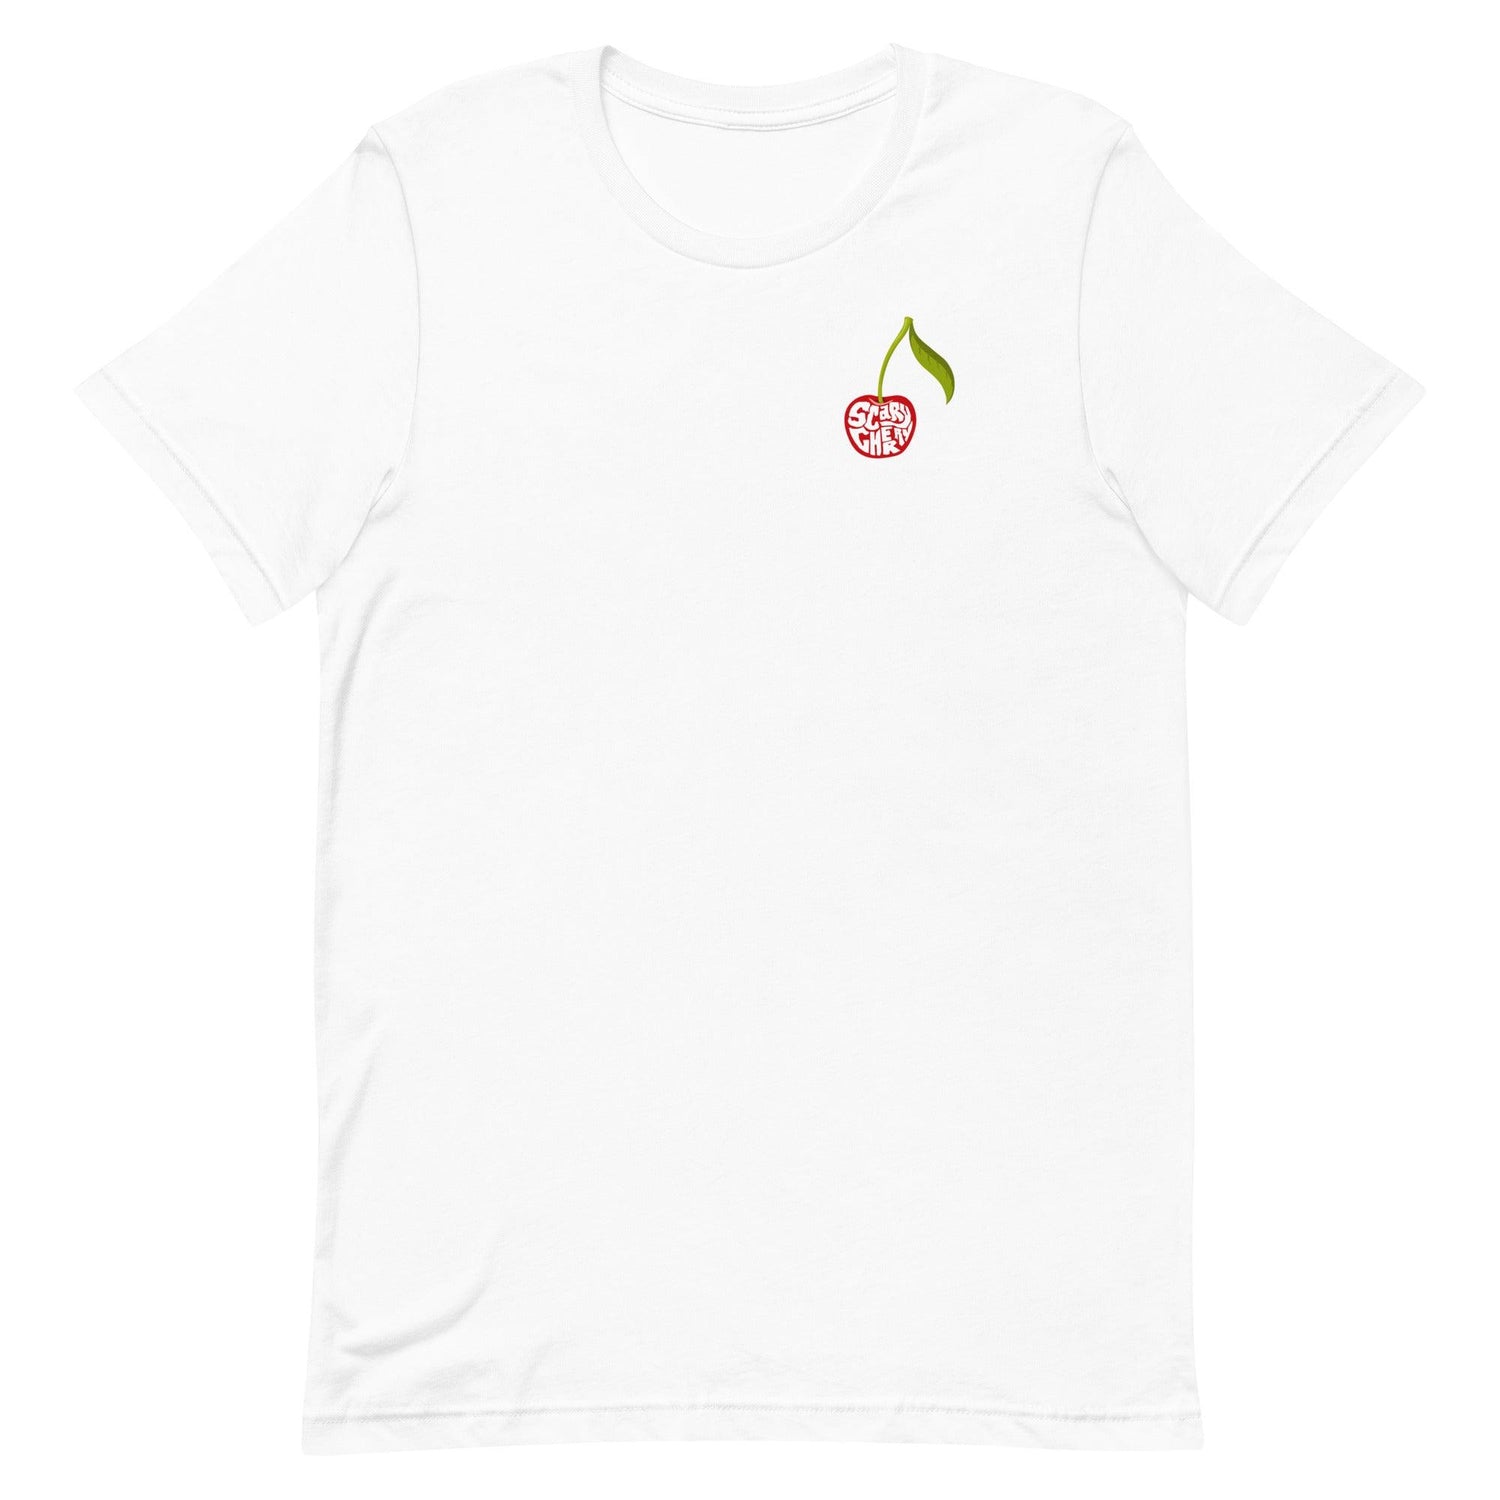 Cecil "Scary Cherry" t-shirt – Fan Arch